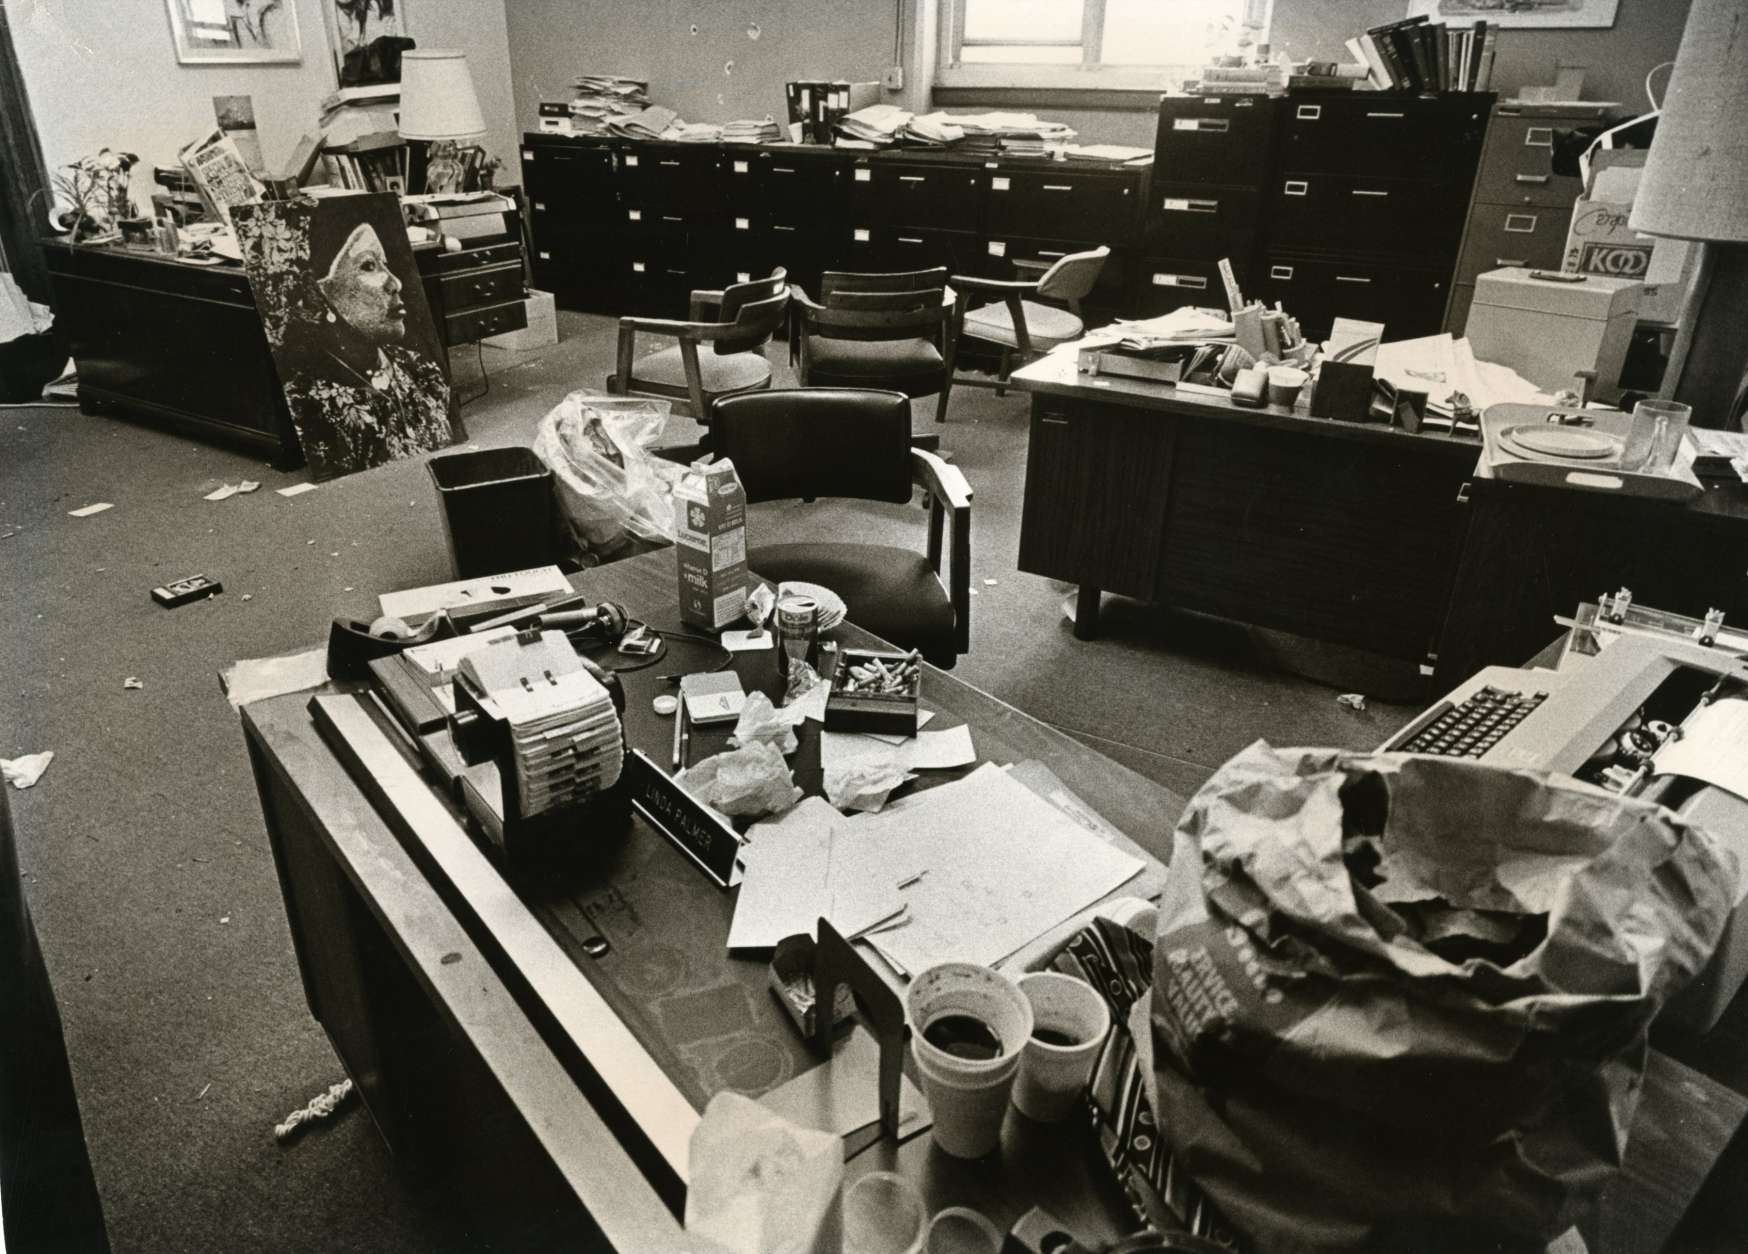 Aftermath of the Hanafi Siege, seen in an image shared as part of the D.C. Council's new photo exhibit in commemoration of the 40th anniversary of the siege. (Courtesy D.C. Council)